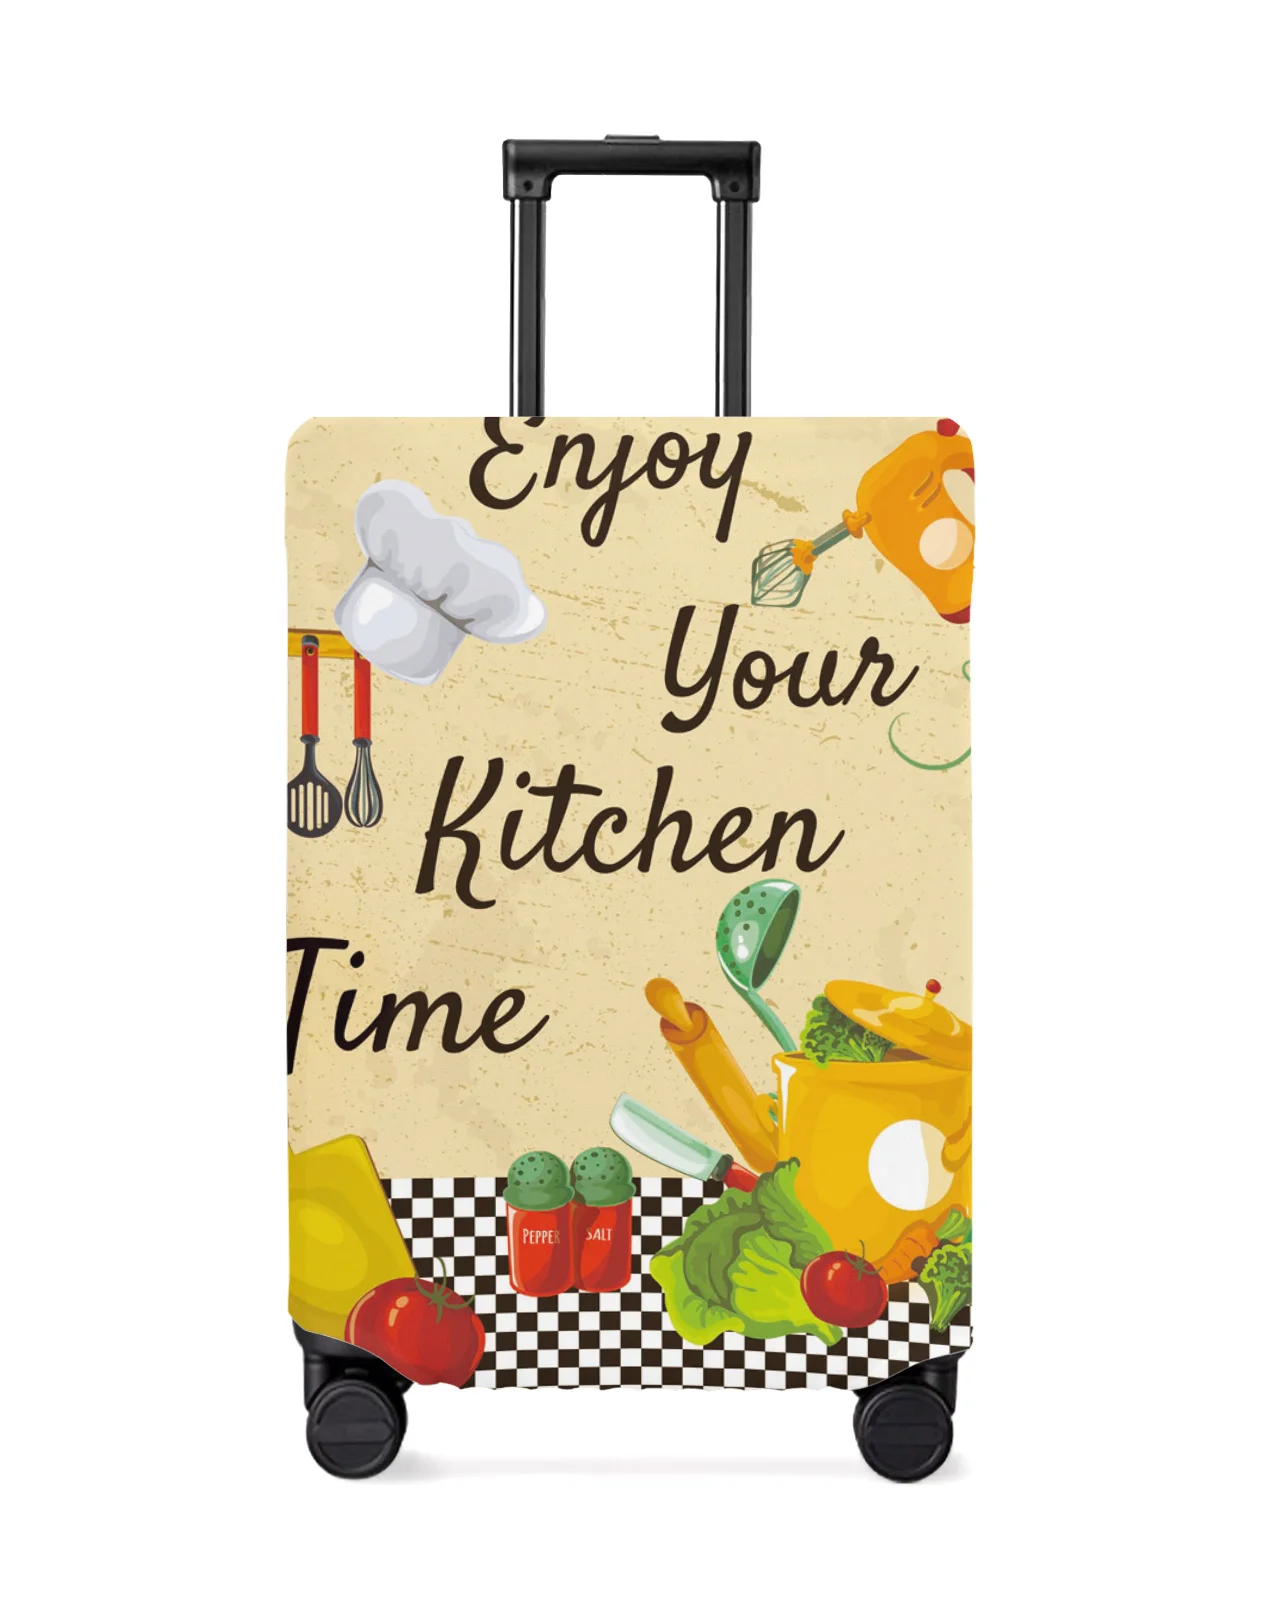 

Kitchen Vegetables Chef Hat Plaid Travel Luggage Cover Elastic Baggage Cover Suitcase Case Dust Cover Travel Accessories